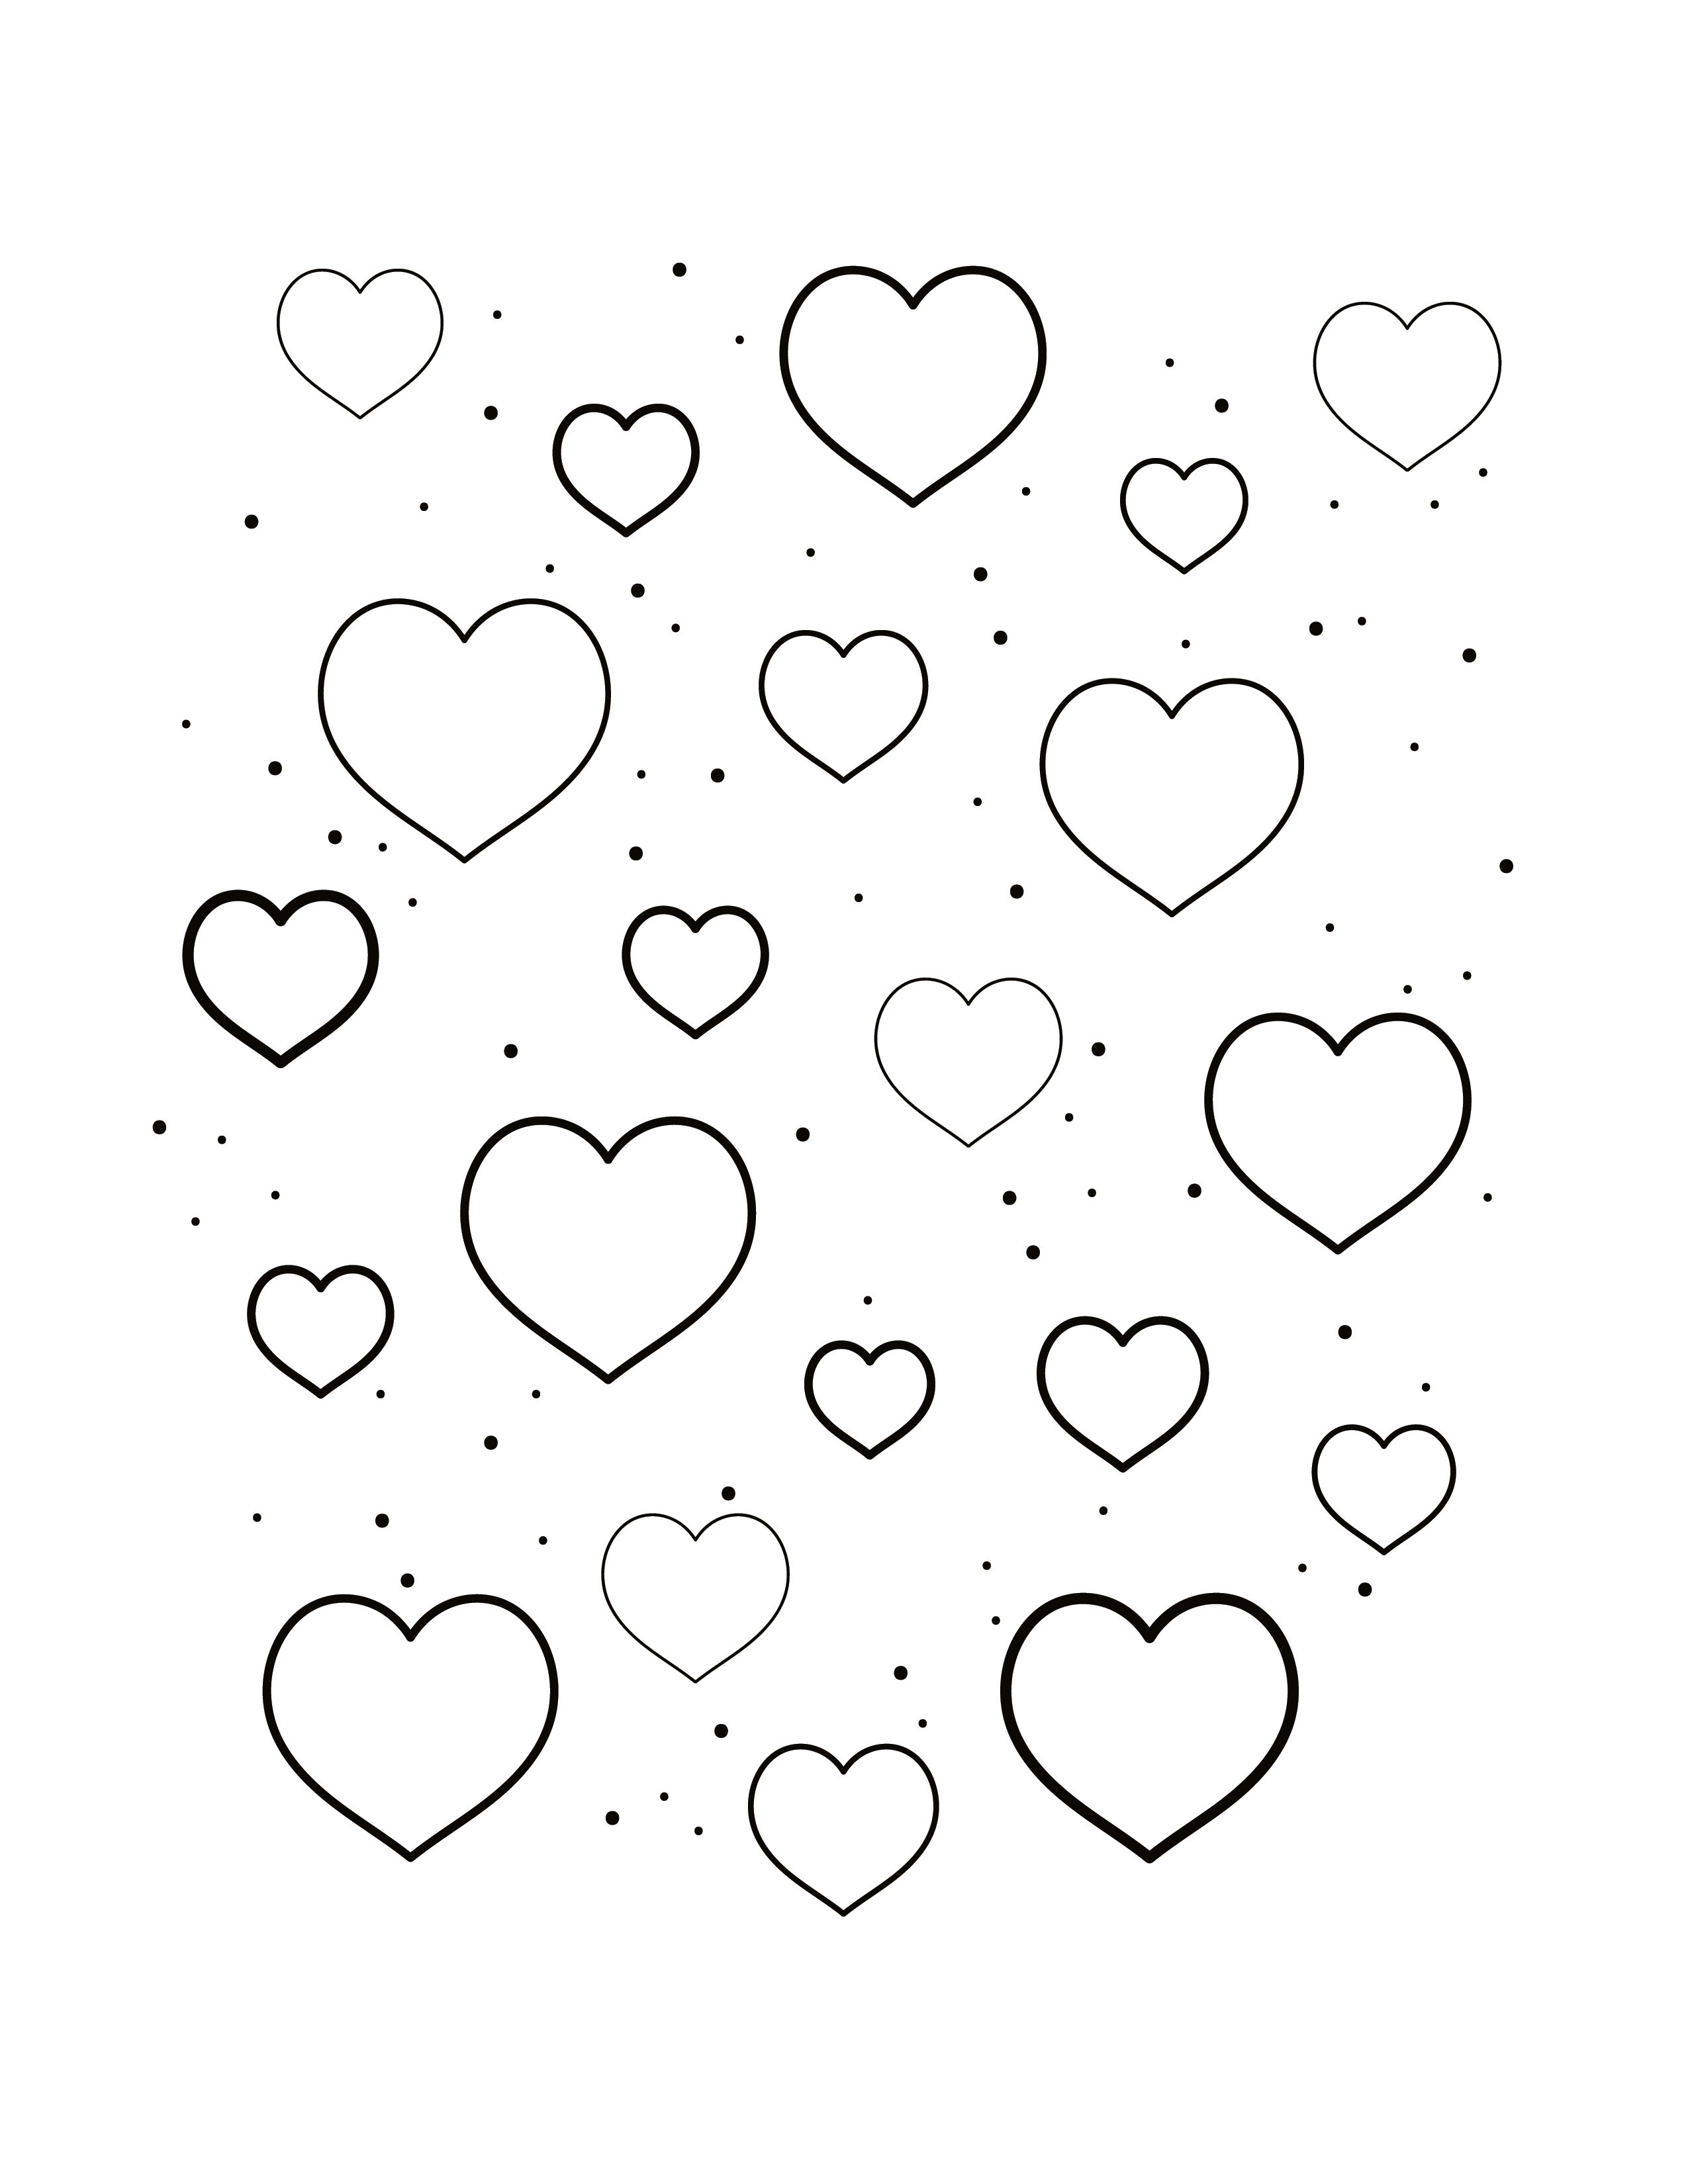 free-shape-coloring-pages-printable-image-download-in-pdf-template